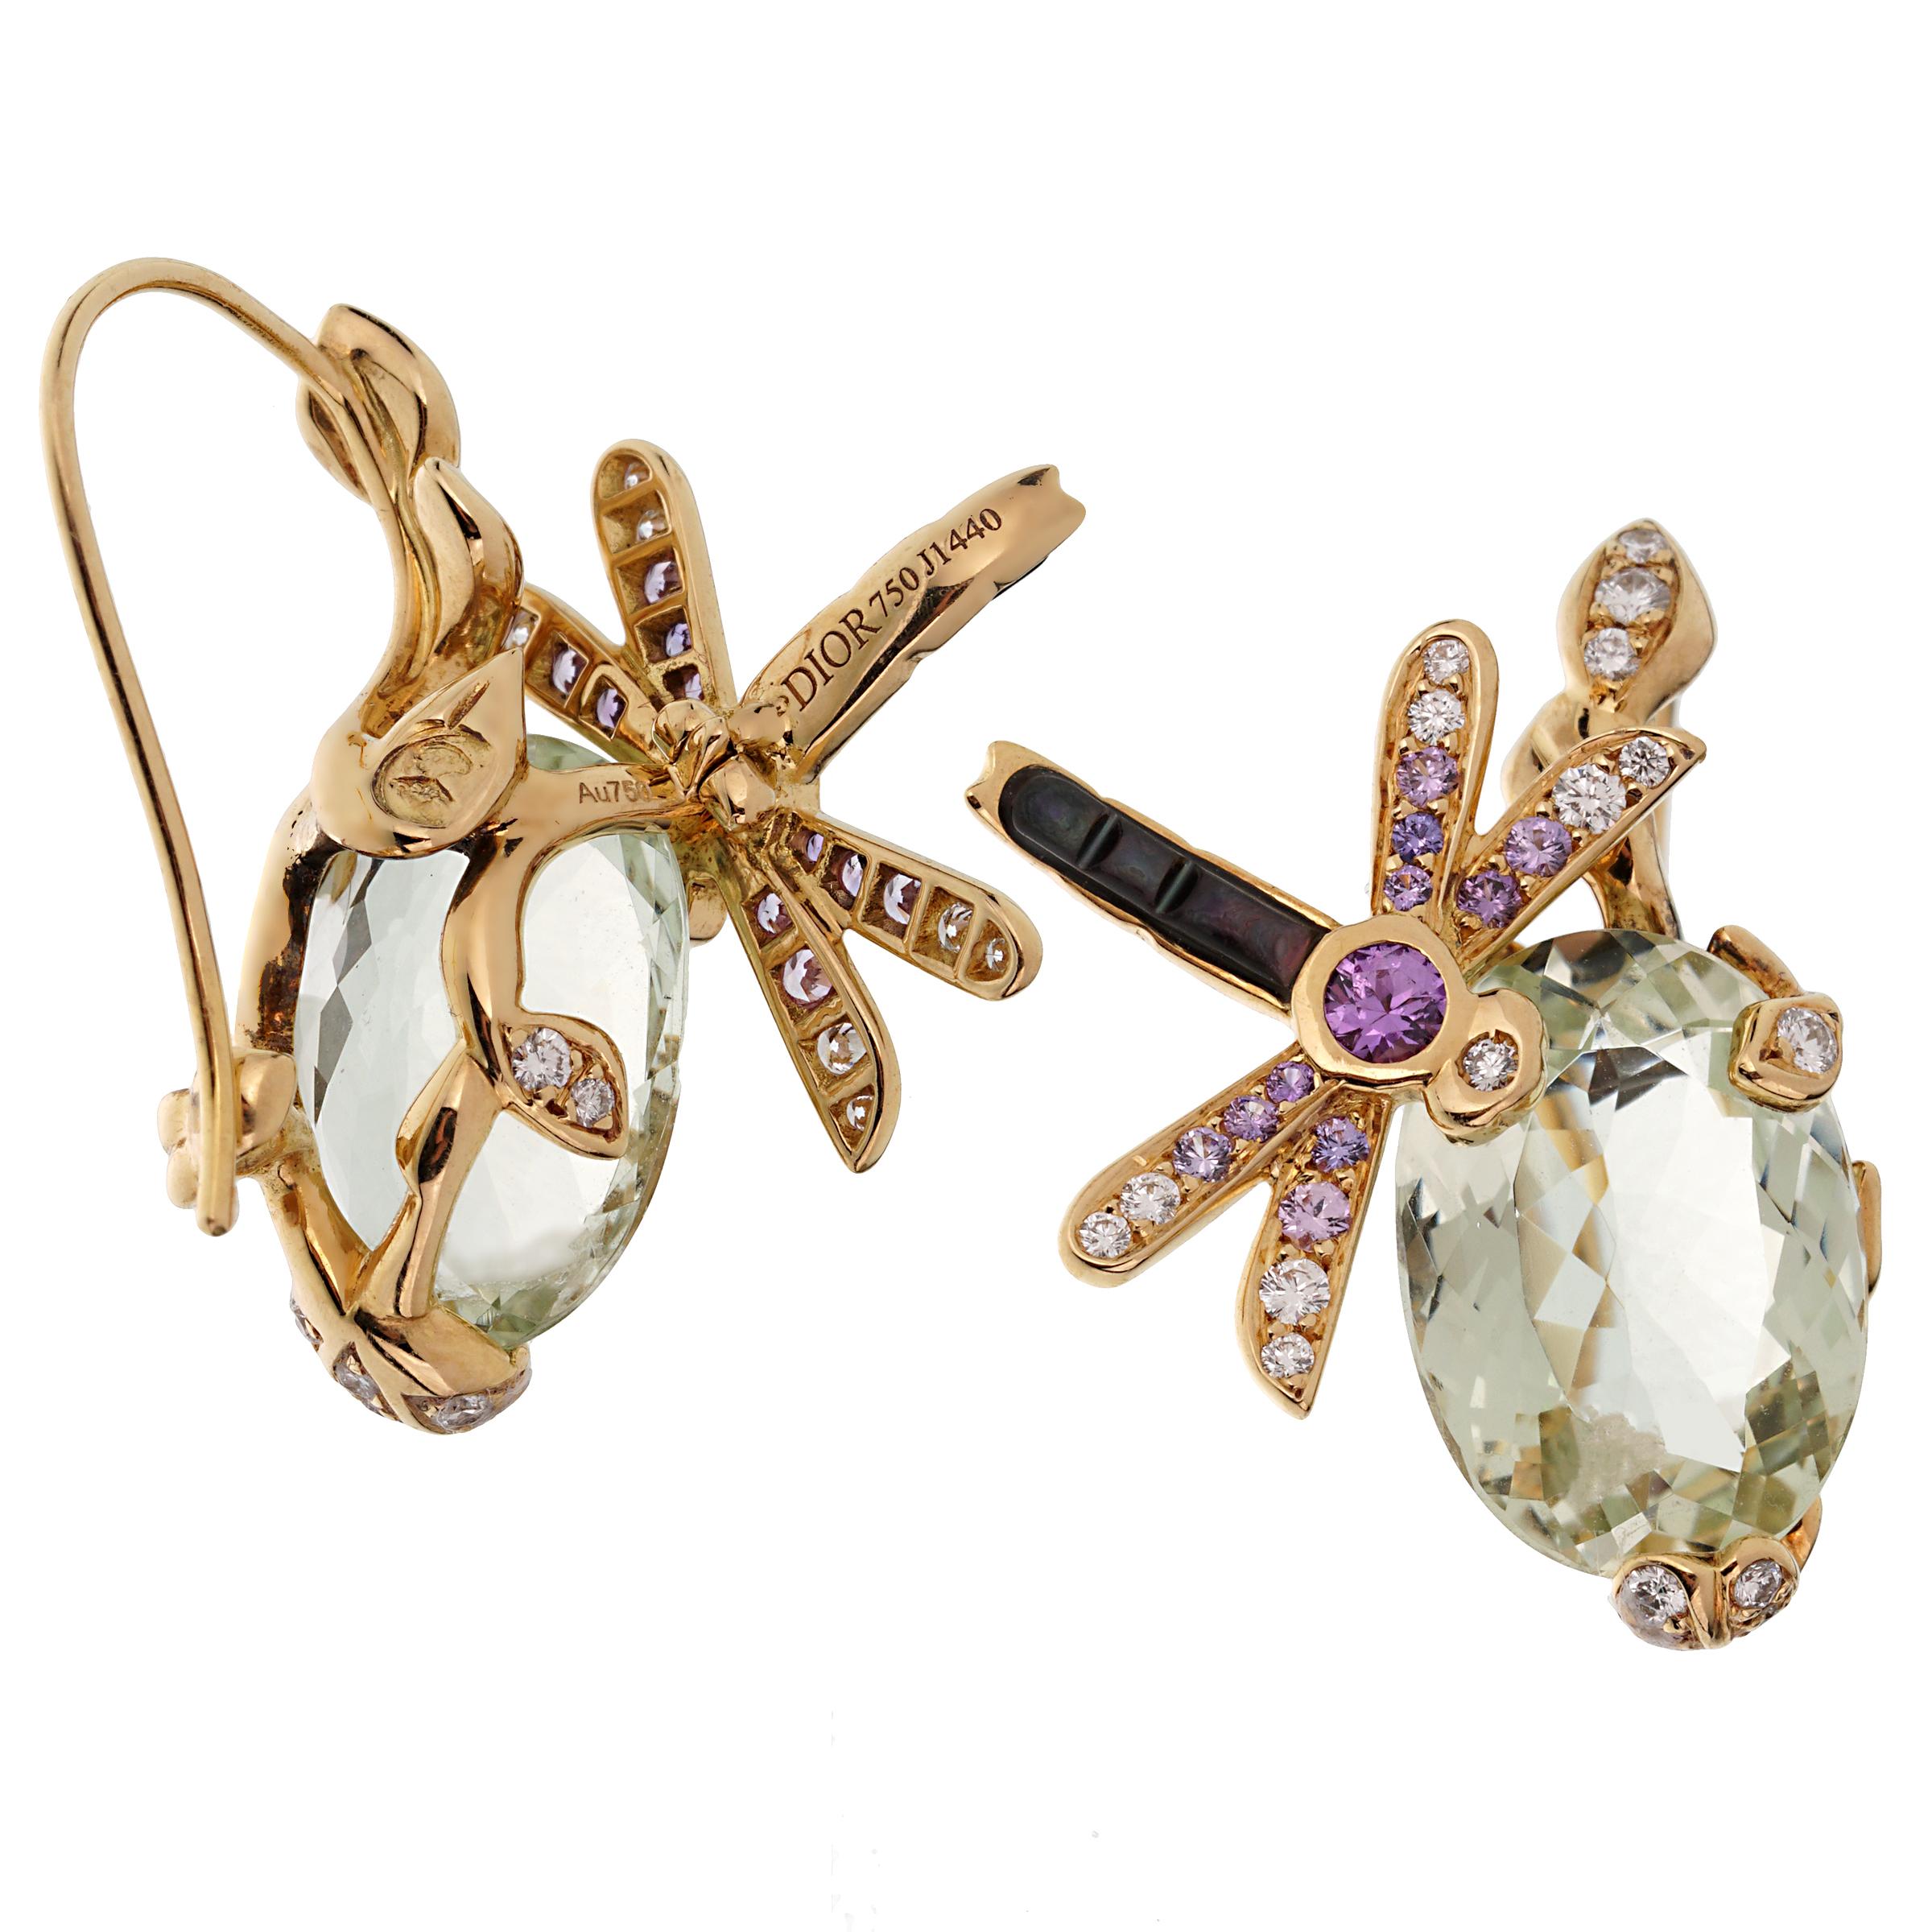 An incredible set of light and airy Christian Dior earrings showcasing a dragonfly motif set with round brilliant cut diamonds and bright beautiful multicolored sapphires atop of a oval shaped green beryl in shimmering 18k yellow gold.